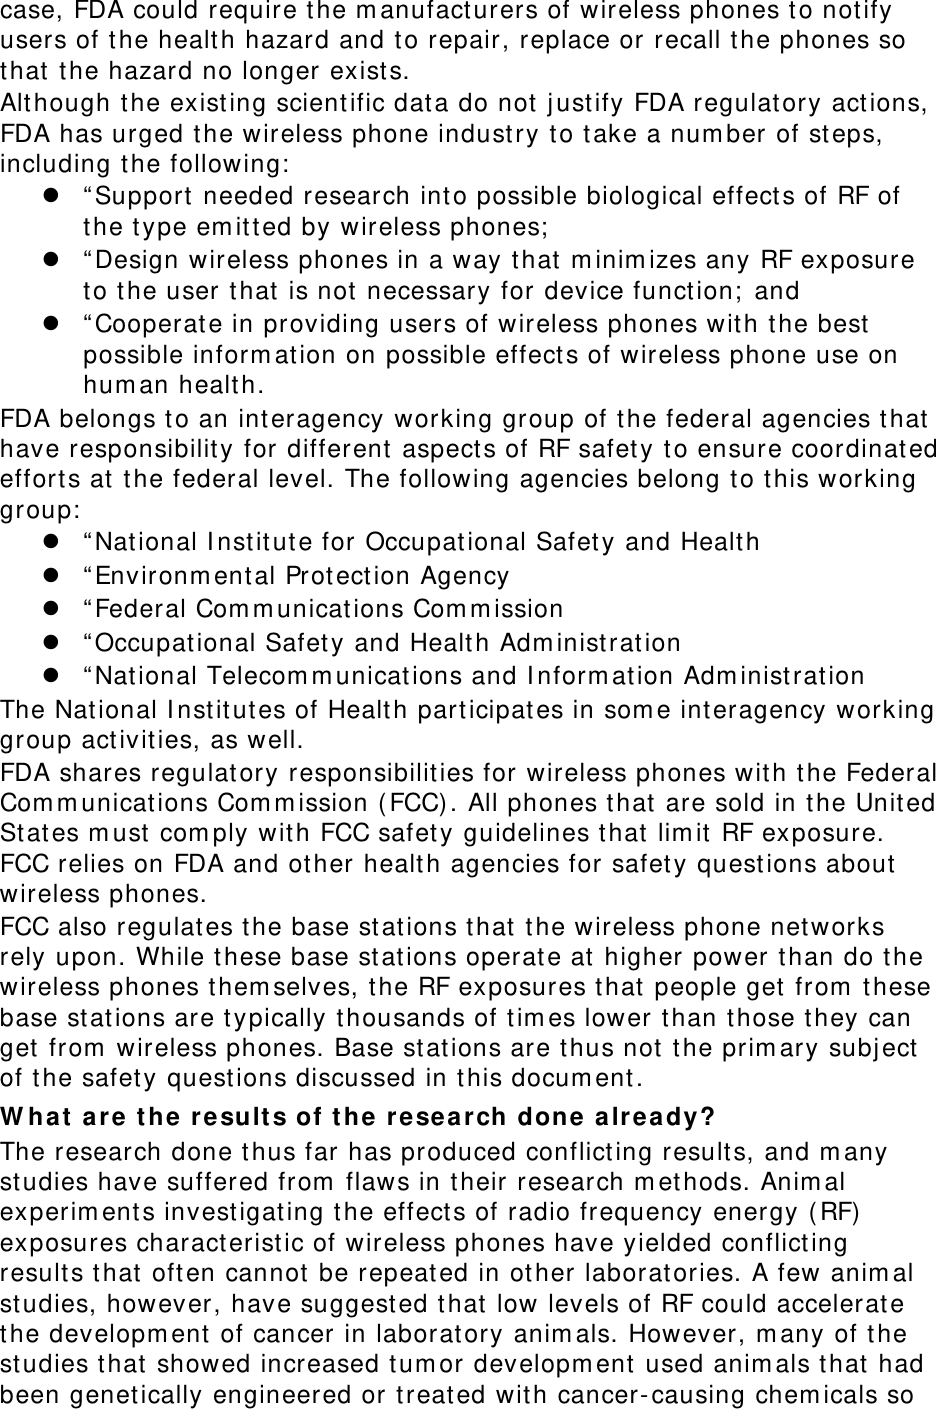 case, FDA could require t he m anufact urers of wireless phones t o not ify users of t he healt h hazard and t o repair, replace or recall the phones so that  t he hazard no longer exist s. Although t he existing scient ific dat a do not  j ust ify FDA regulat ory act ions, FDA has urged t he wireless phone indust ry to take a num ber of st eps, including t he following:  z “ Support needed research into possible biological effect s of RF of the t ype em itt ed by wireless phones;  z “ Design wireless phones in a way that  m inim izes any RF exposure to the user t hat  is not  necessary for device funct ion;  and z “ Cooperat e in providing users of wireless phones wit h t he best possible inform at ion on possible effect s of wireless phone use on hum an healt h. FDA belongs t o an interagency working group of the federal agencies t hat  have responsibilit y for different  aspects of RF safet y t o ensure coordinat ed effort s at  the federal level. The following agencies belong to t his working group:  z “ Nat ional I nst itute for Occupat ional Safety and Healt h z “ Environm ent al Protection Agency z “ Federal Com m unicat ions Com m ission z “ Occupat ional Safety and Healt h Adm inist rat ion z “ Nat ional Telecom m unicat ions and I nform at ion Adm inist rat ion The Nat ional I nst it utes of Healt h part icipates in som e interagency working group act ivit ies, as well. FDA shares regulat ory responsibilit ies for wireless phones wit h t he Federal Com m unicat ions Com m ission ( FCC). All phones t hat  are sold in t he Unit ed St ates m ust  com ply with FCC safet y guidelines t hat  lim it  RF exposure. FCC relies on FDA and ot her healt h agencies for safet y questions about  wireless phones. FCC also regulat es t he base st at ions t hat  the wireless phone networks rely upon. While t hese base st ations operate at  higher power t han do t he wireless phones t hem selves, t he RF exposures t hat  people get from  t hese base st ations are t ypically t housands of t im es lower t han those t hey can get  from  wireless phones. Base st at ions are t hus not  t he prim ary subj ect  of t he safet y quest ions discussed in t his docum ent . W h a t  a re t he r e sult s of t he  re sea r ch done a lr e a dy? The research done t hus far has produced conflicting result s, and m any studies have suffered from  flaws in t heir research m et hods. Anim al experim ent s investigat ing t he effect s of radio frequency energy ( RF)  exposures characterist ic of wireless phones have yielded conflicting result s t hat  oft en cannot  be repeat ed in other laborat ories. A few anim al studies, however, have suggest ed t hat  low levels of RF could accelerate the developm ent  of cancer in laborat ory anim als. However, m any of the studies t hat  showed increased t um or developm ent used anim als that  had been genetically engineered or t reat ed wit h cancer-causing chem icals so 